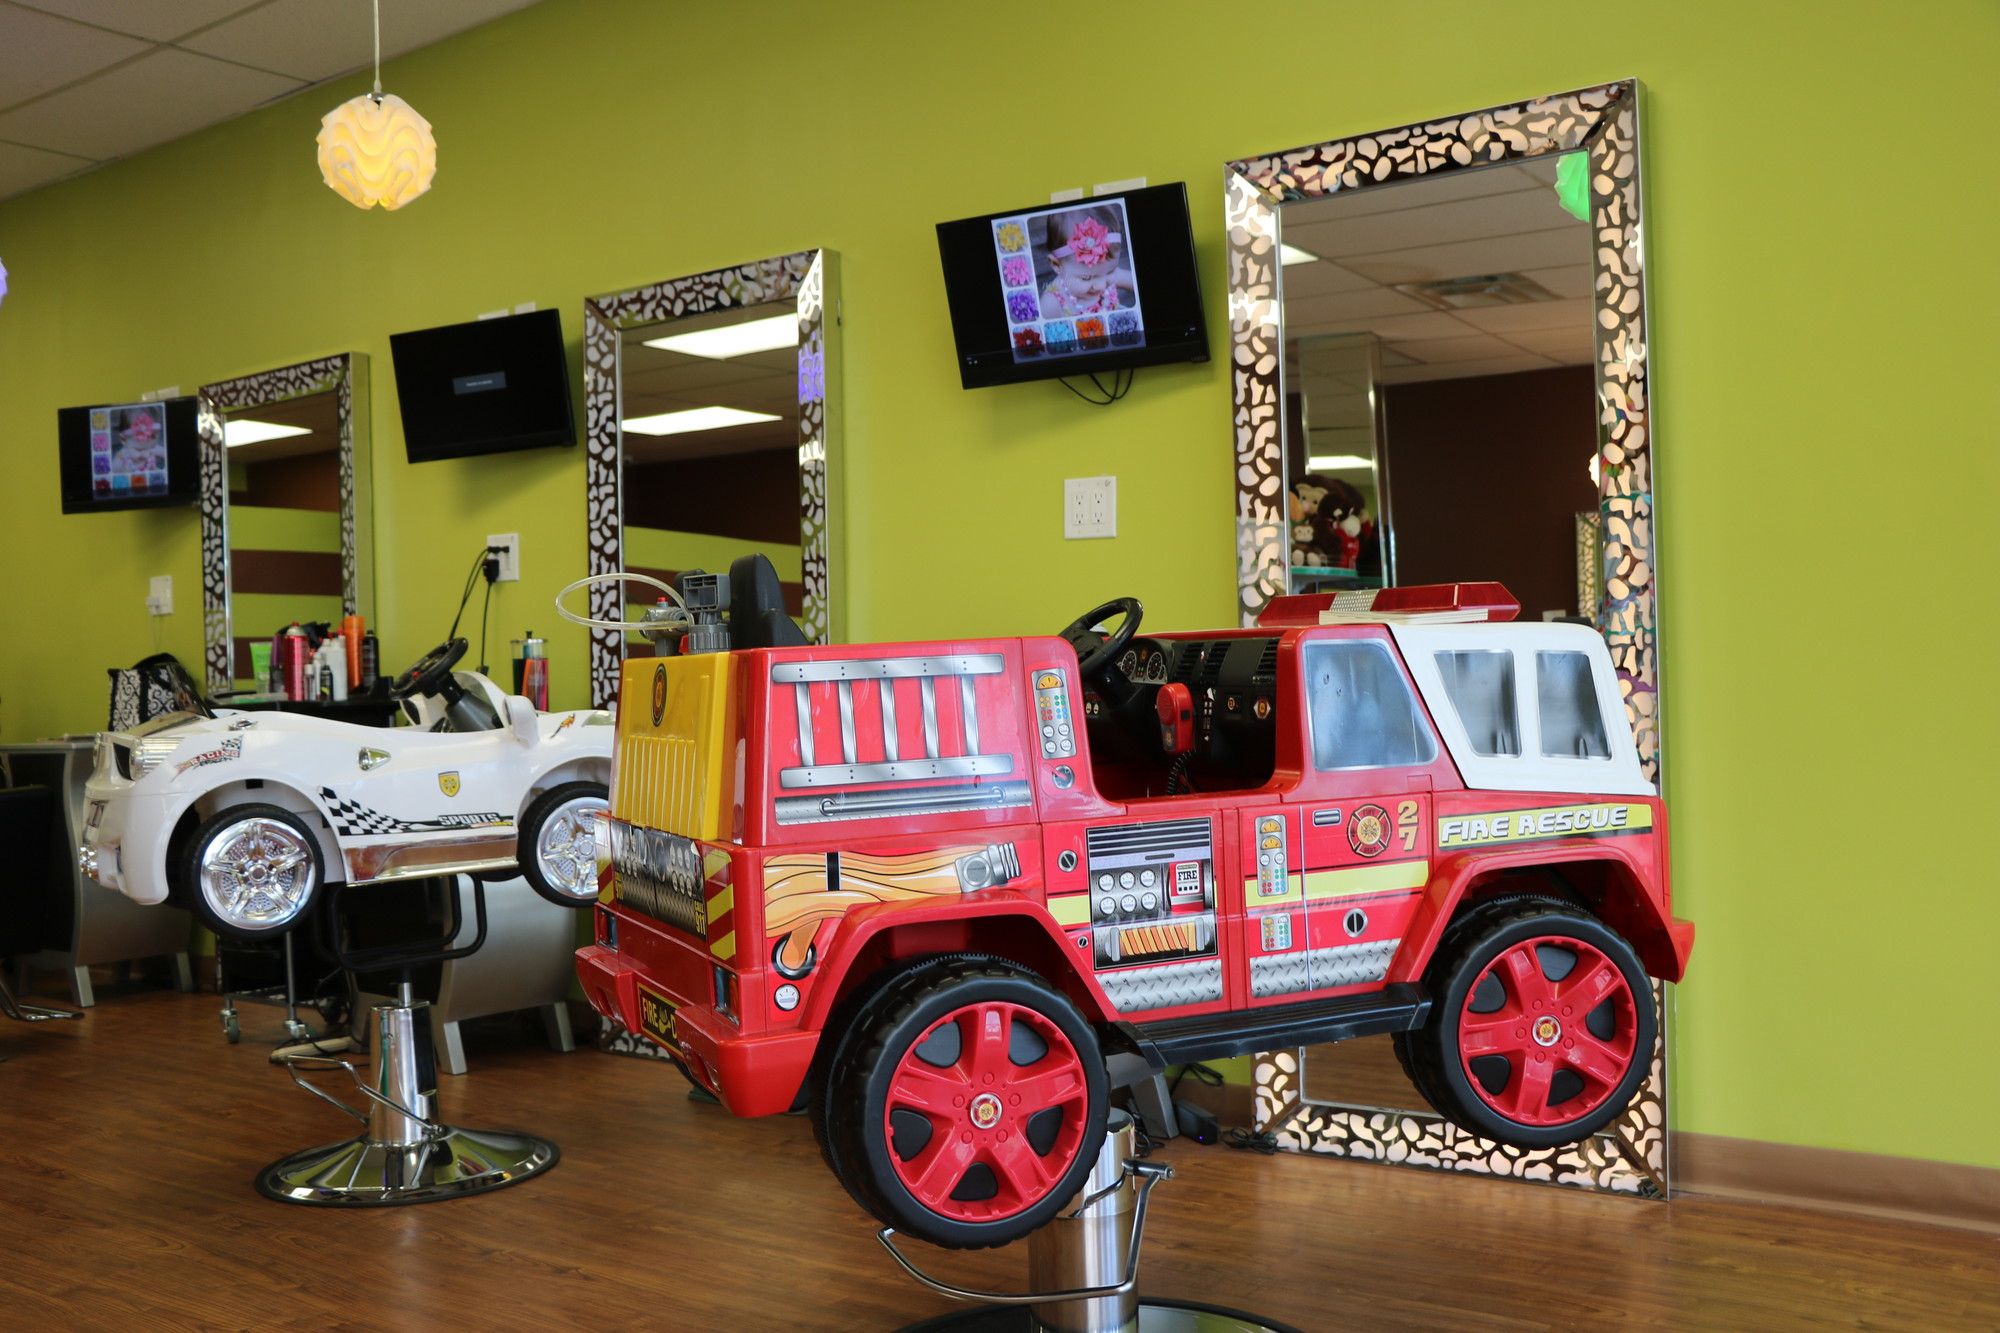 Being the driver of a fire truck or race car is just one of the joys of getting your haircut at the Fun Salon in West Hempstead.